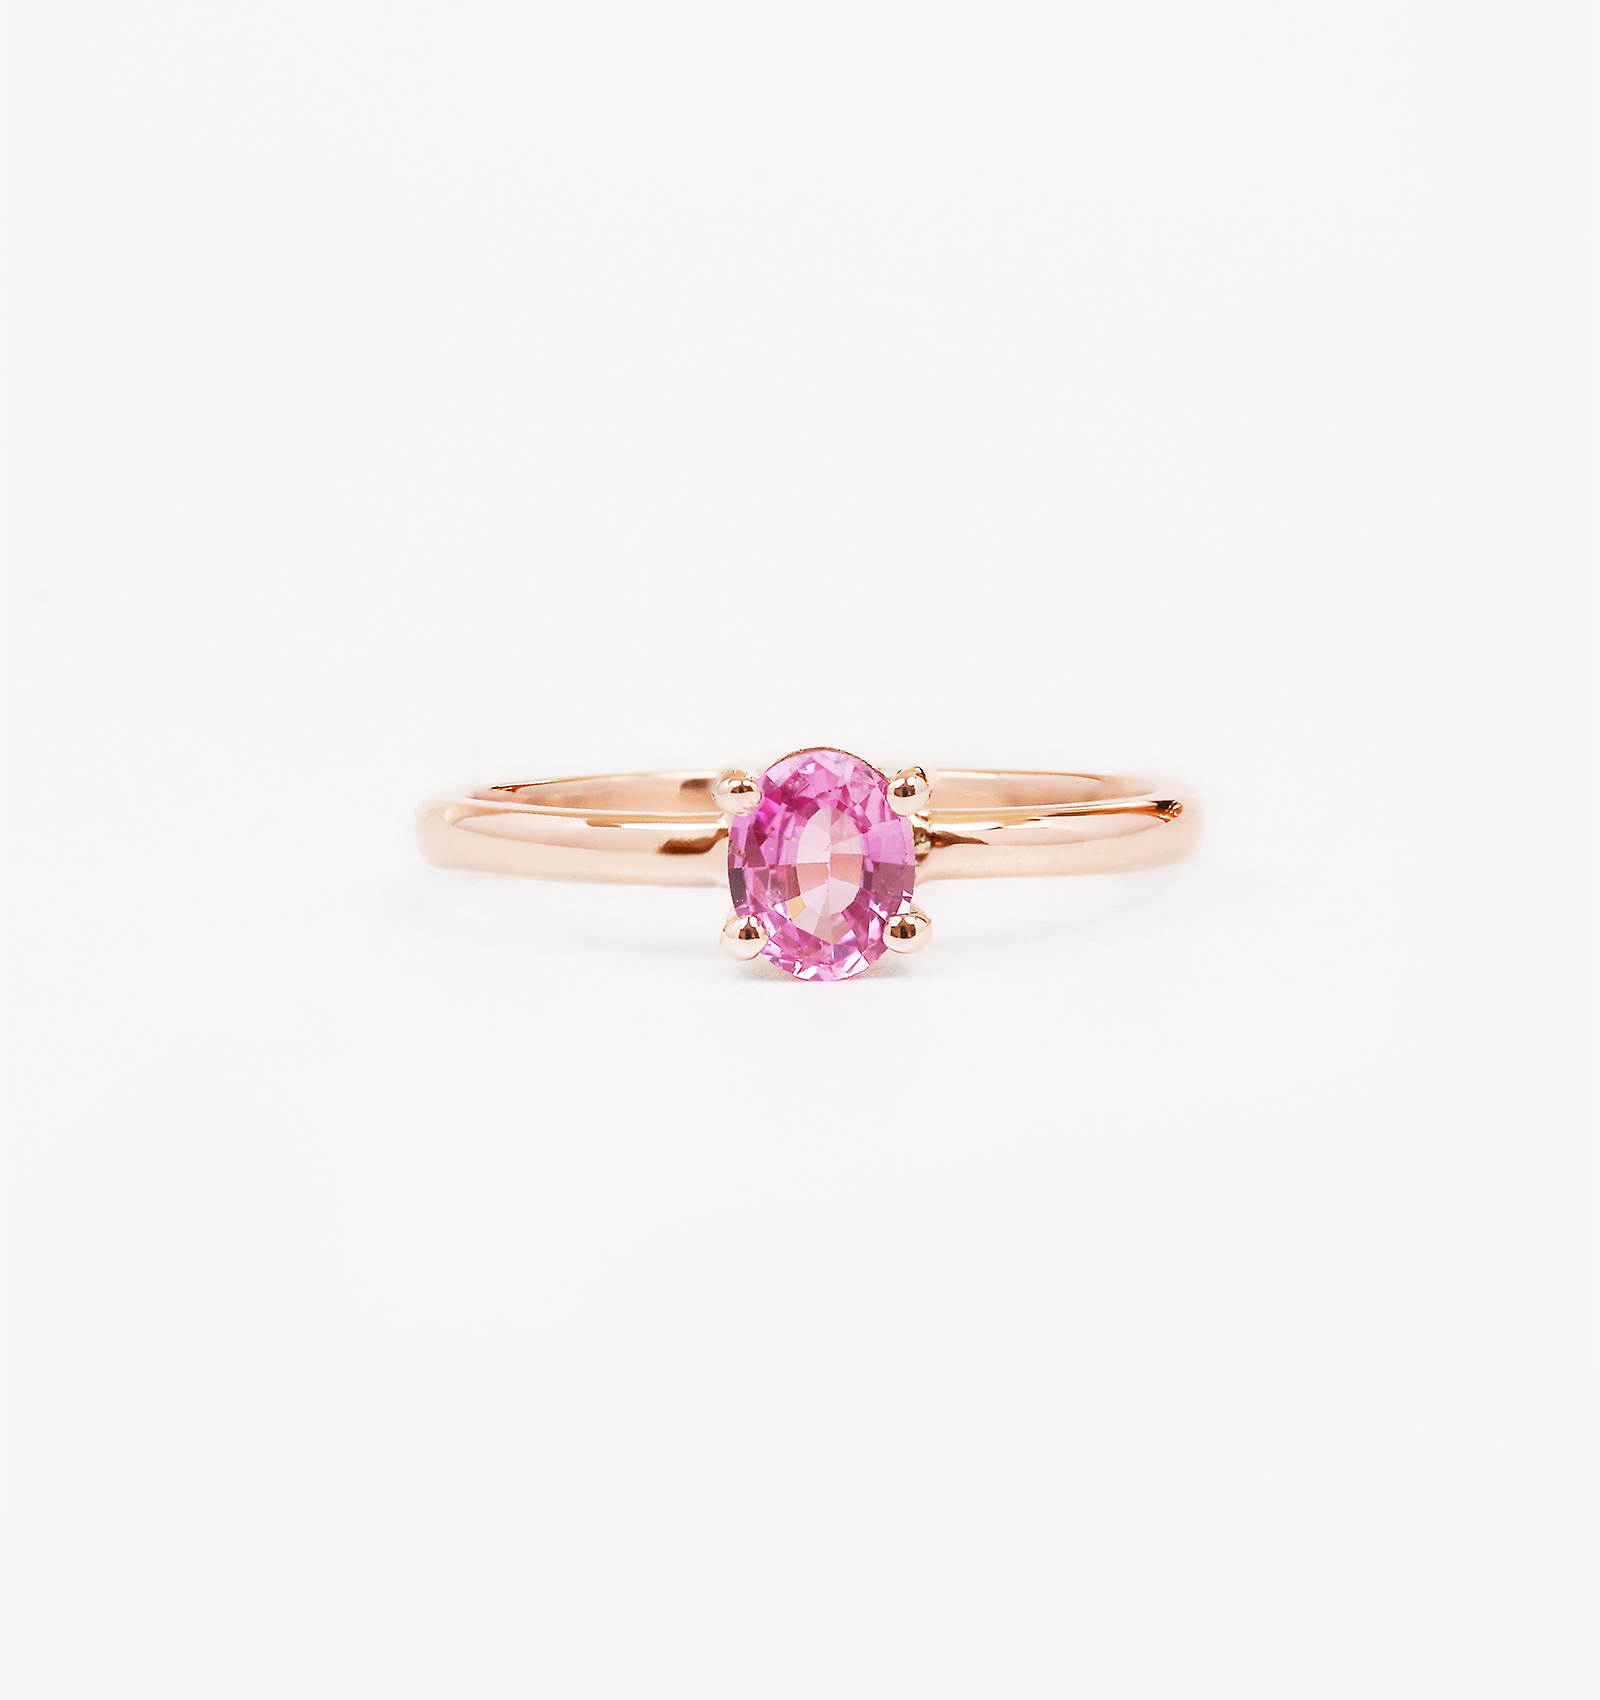 Pink Sapphire Ring in Rose Gold, Minimalist Engagement Ring - DIORAH ...